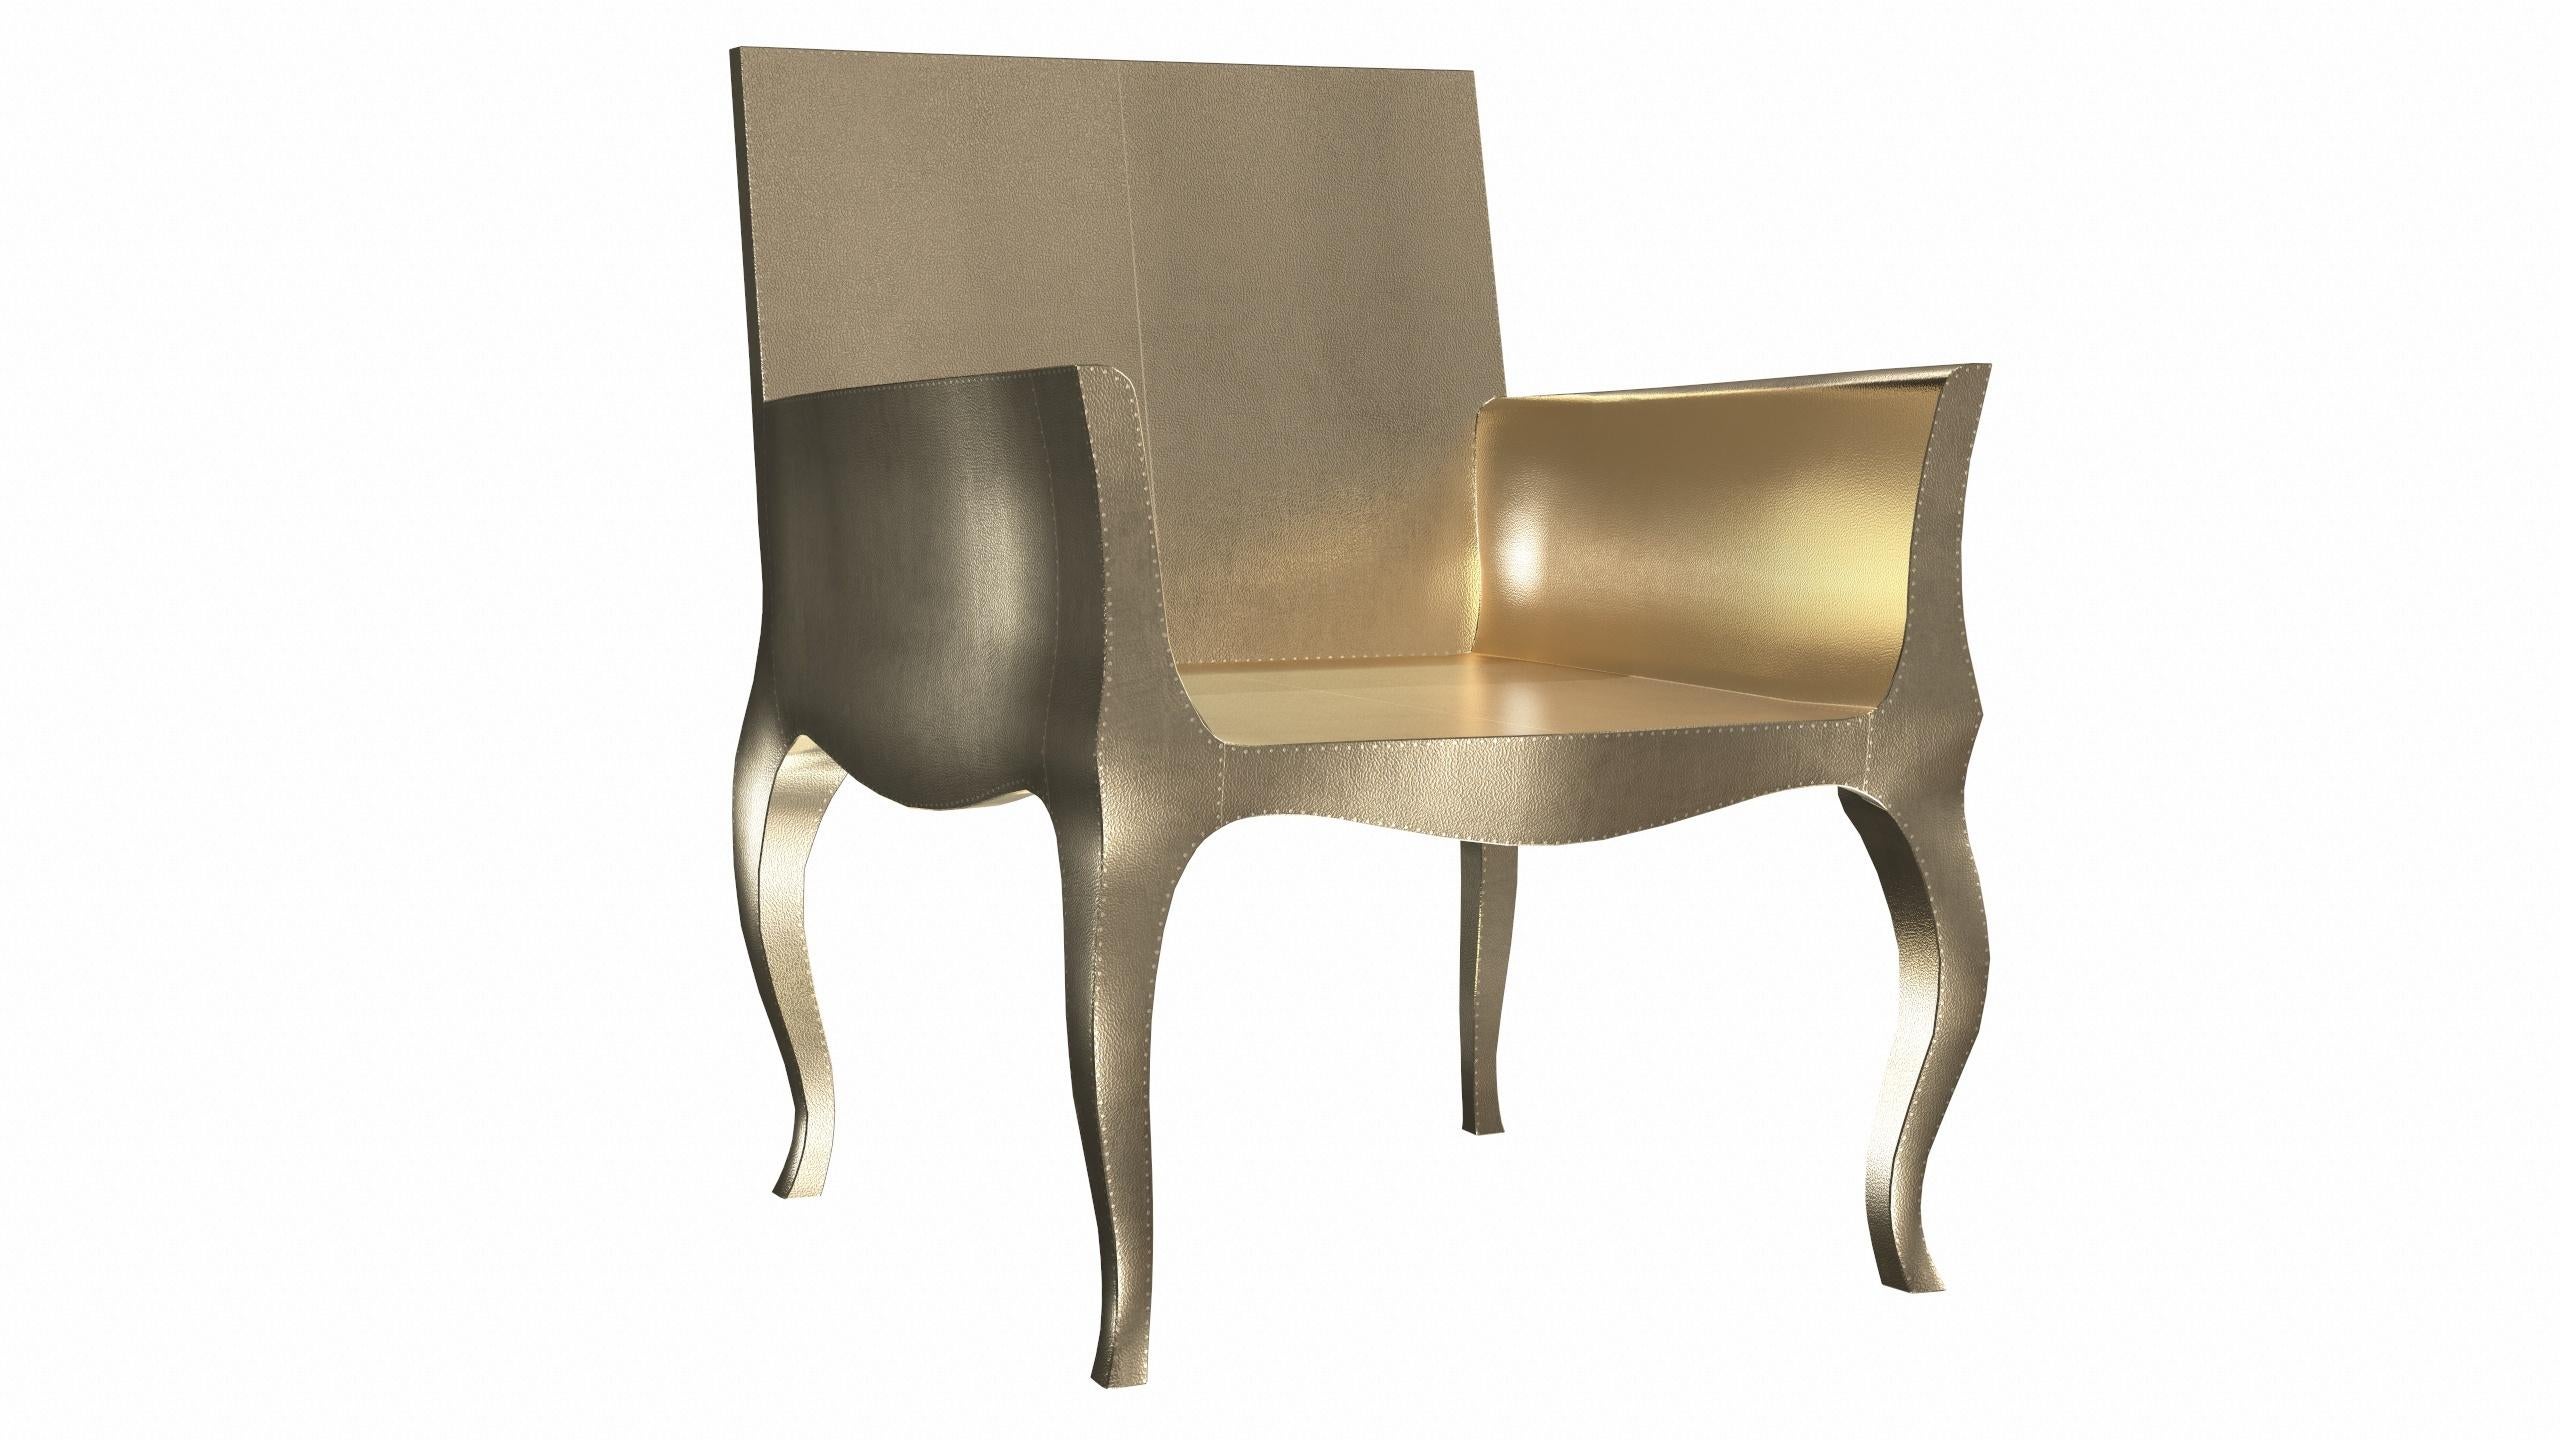 Hand-Carved Art Deco Style Chairs Fine Hammered in Brass by Paul Mathieu For Sale